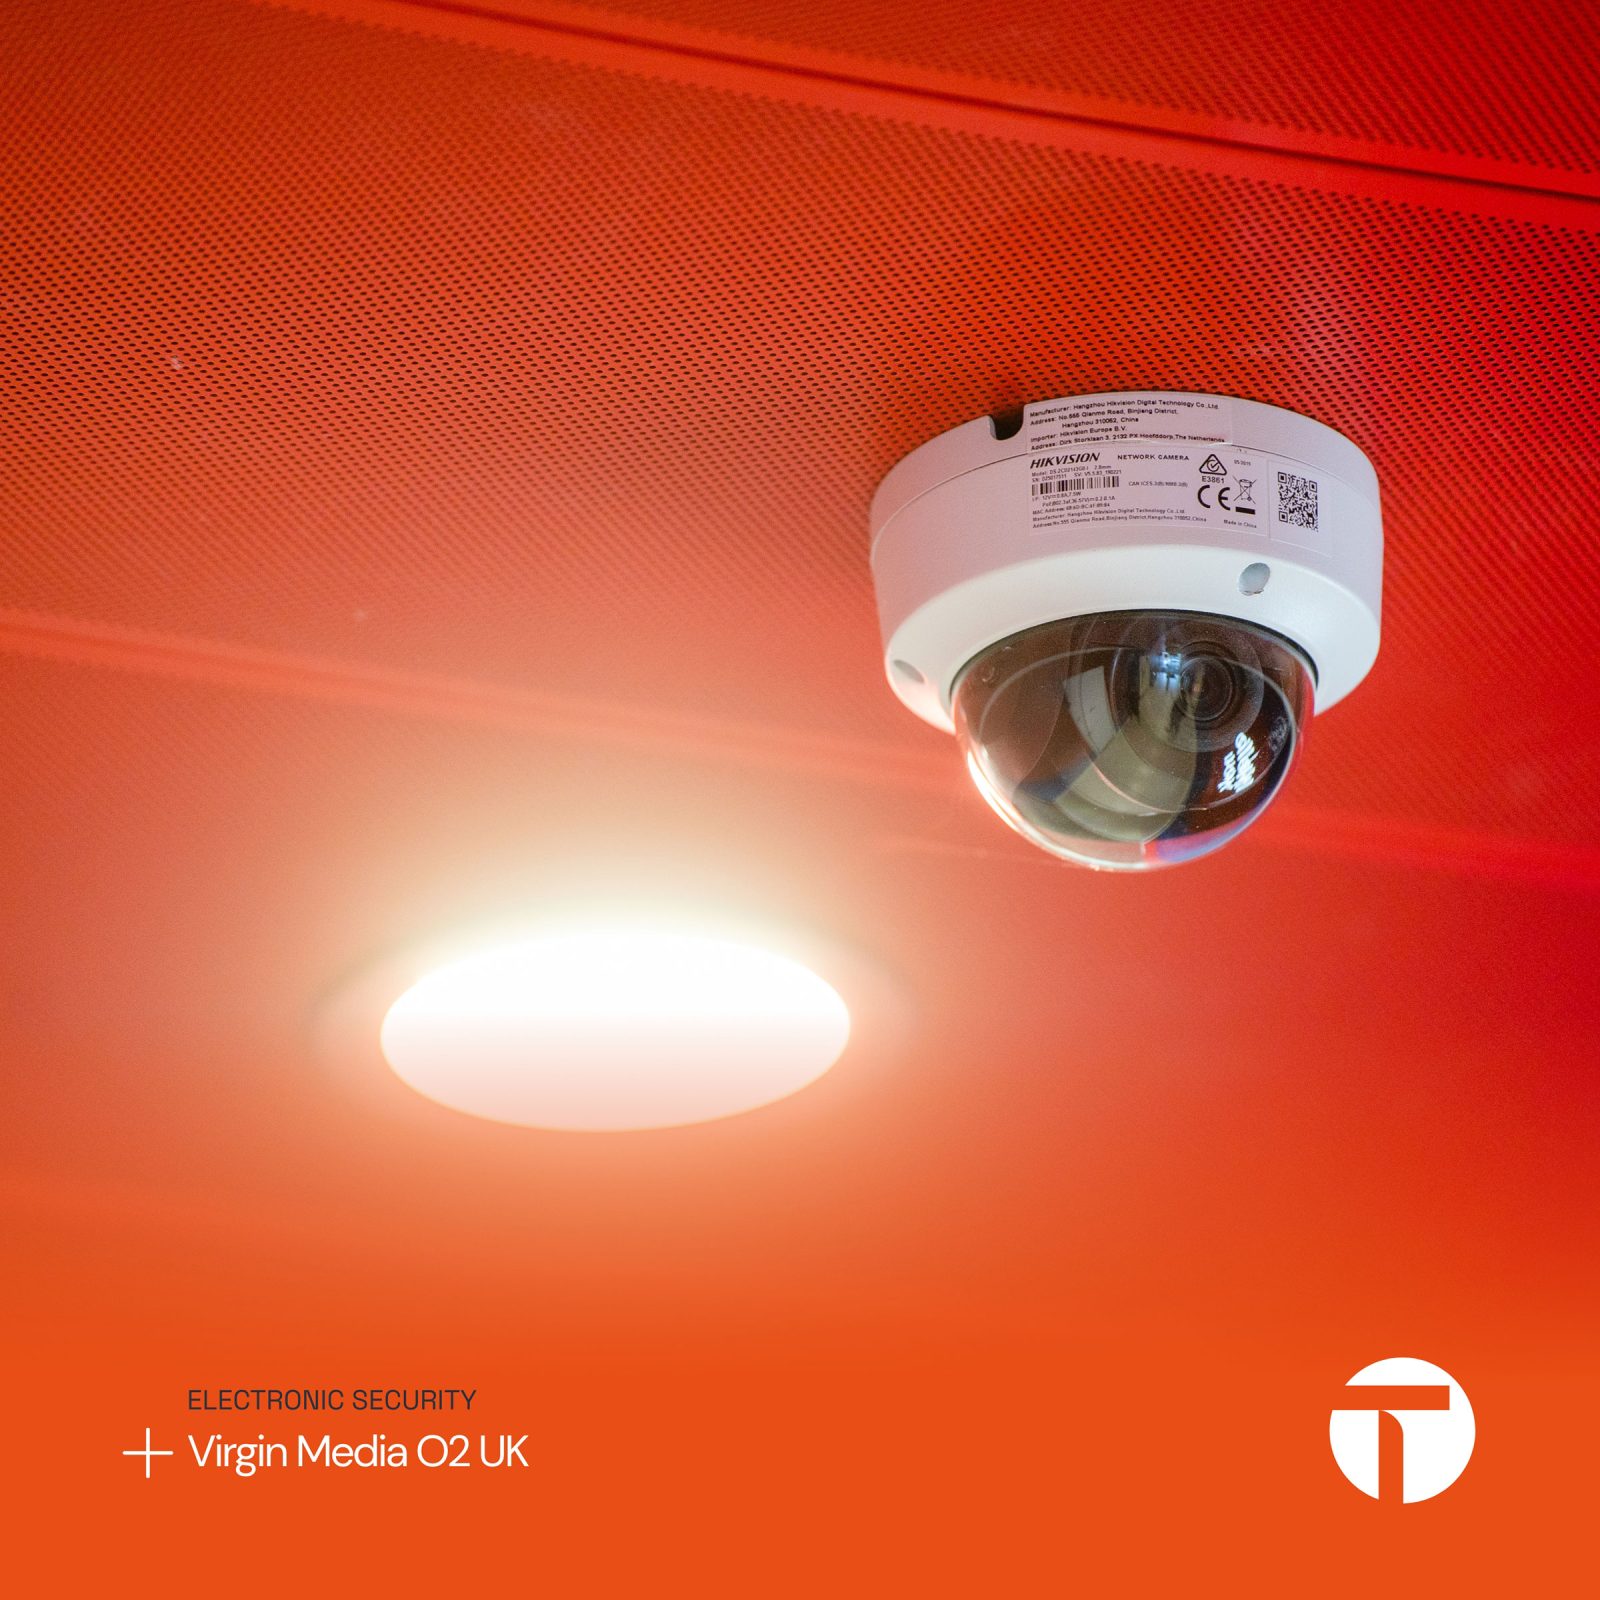 A security camera mounted on a red ceiling next to a bright circular light, with the Virgin Media O2 UK logo indicating electronic security services provided by Brand Agency Cardiff.